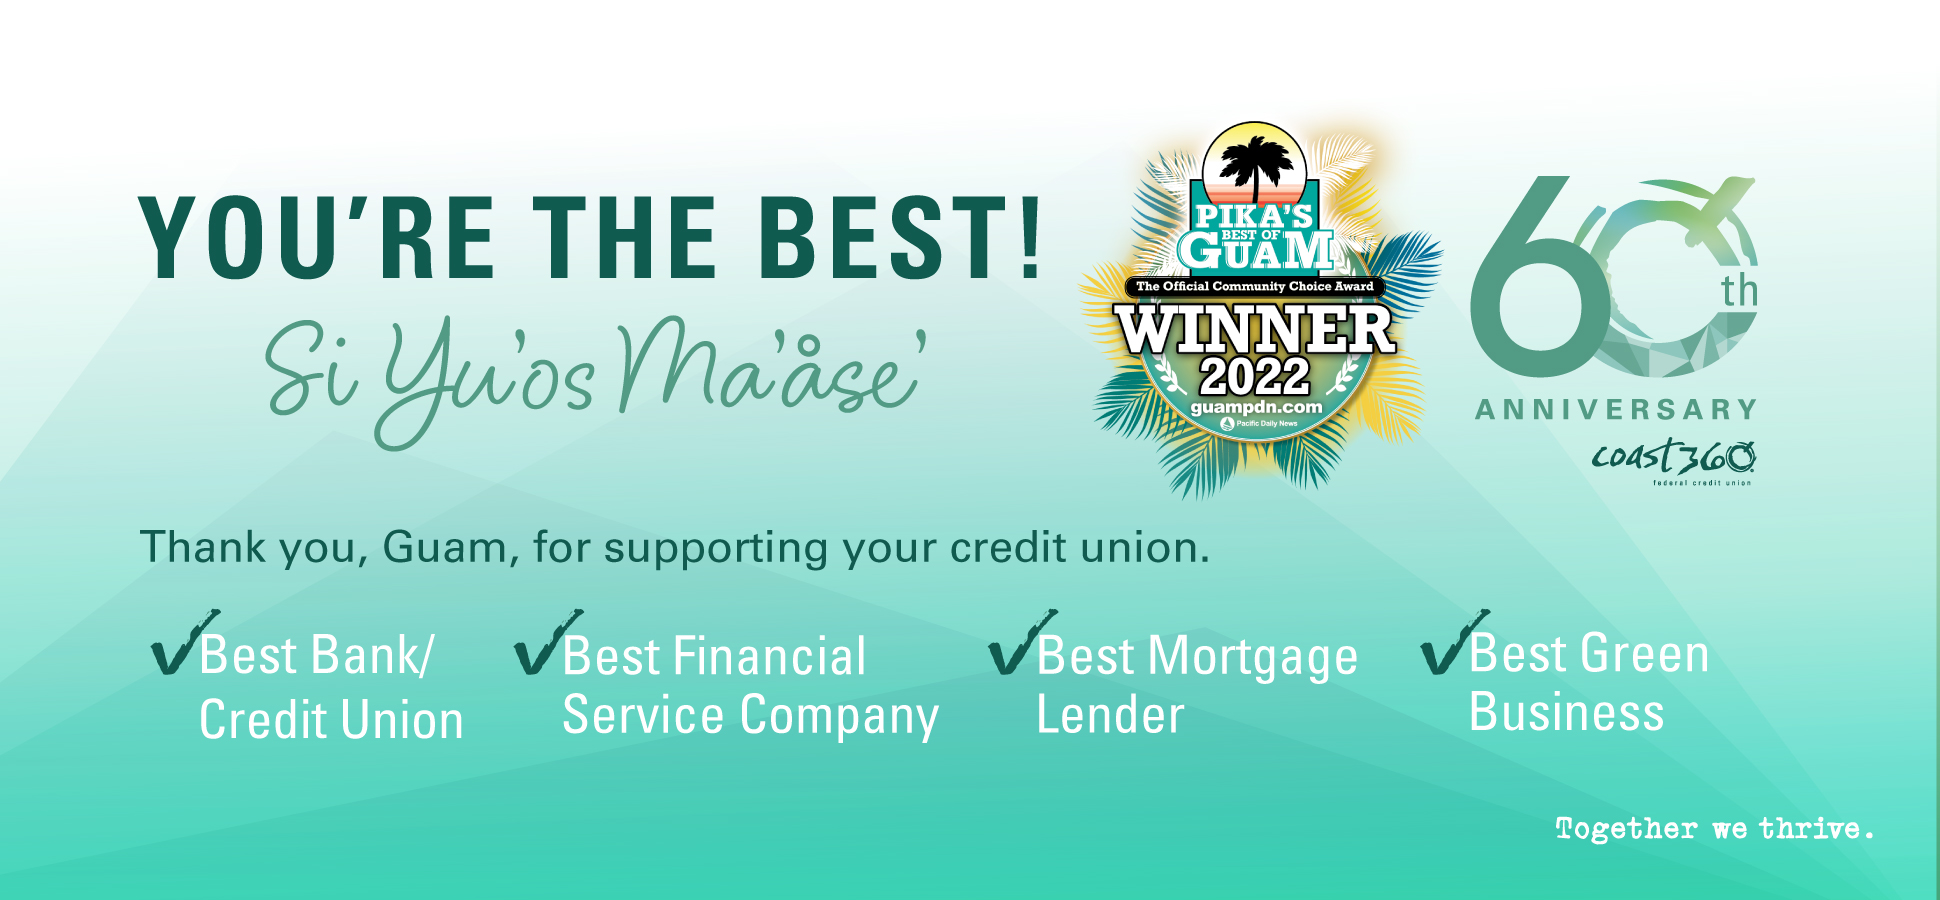 We Win Together. Best Bank/Credit Union. Best Mortgage Lender. Best Financial Service Company. Best Green Business. Thank you 